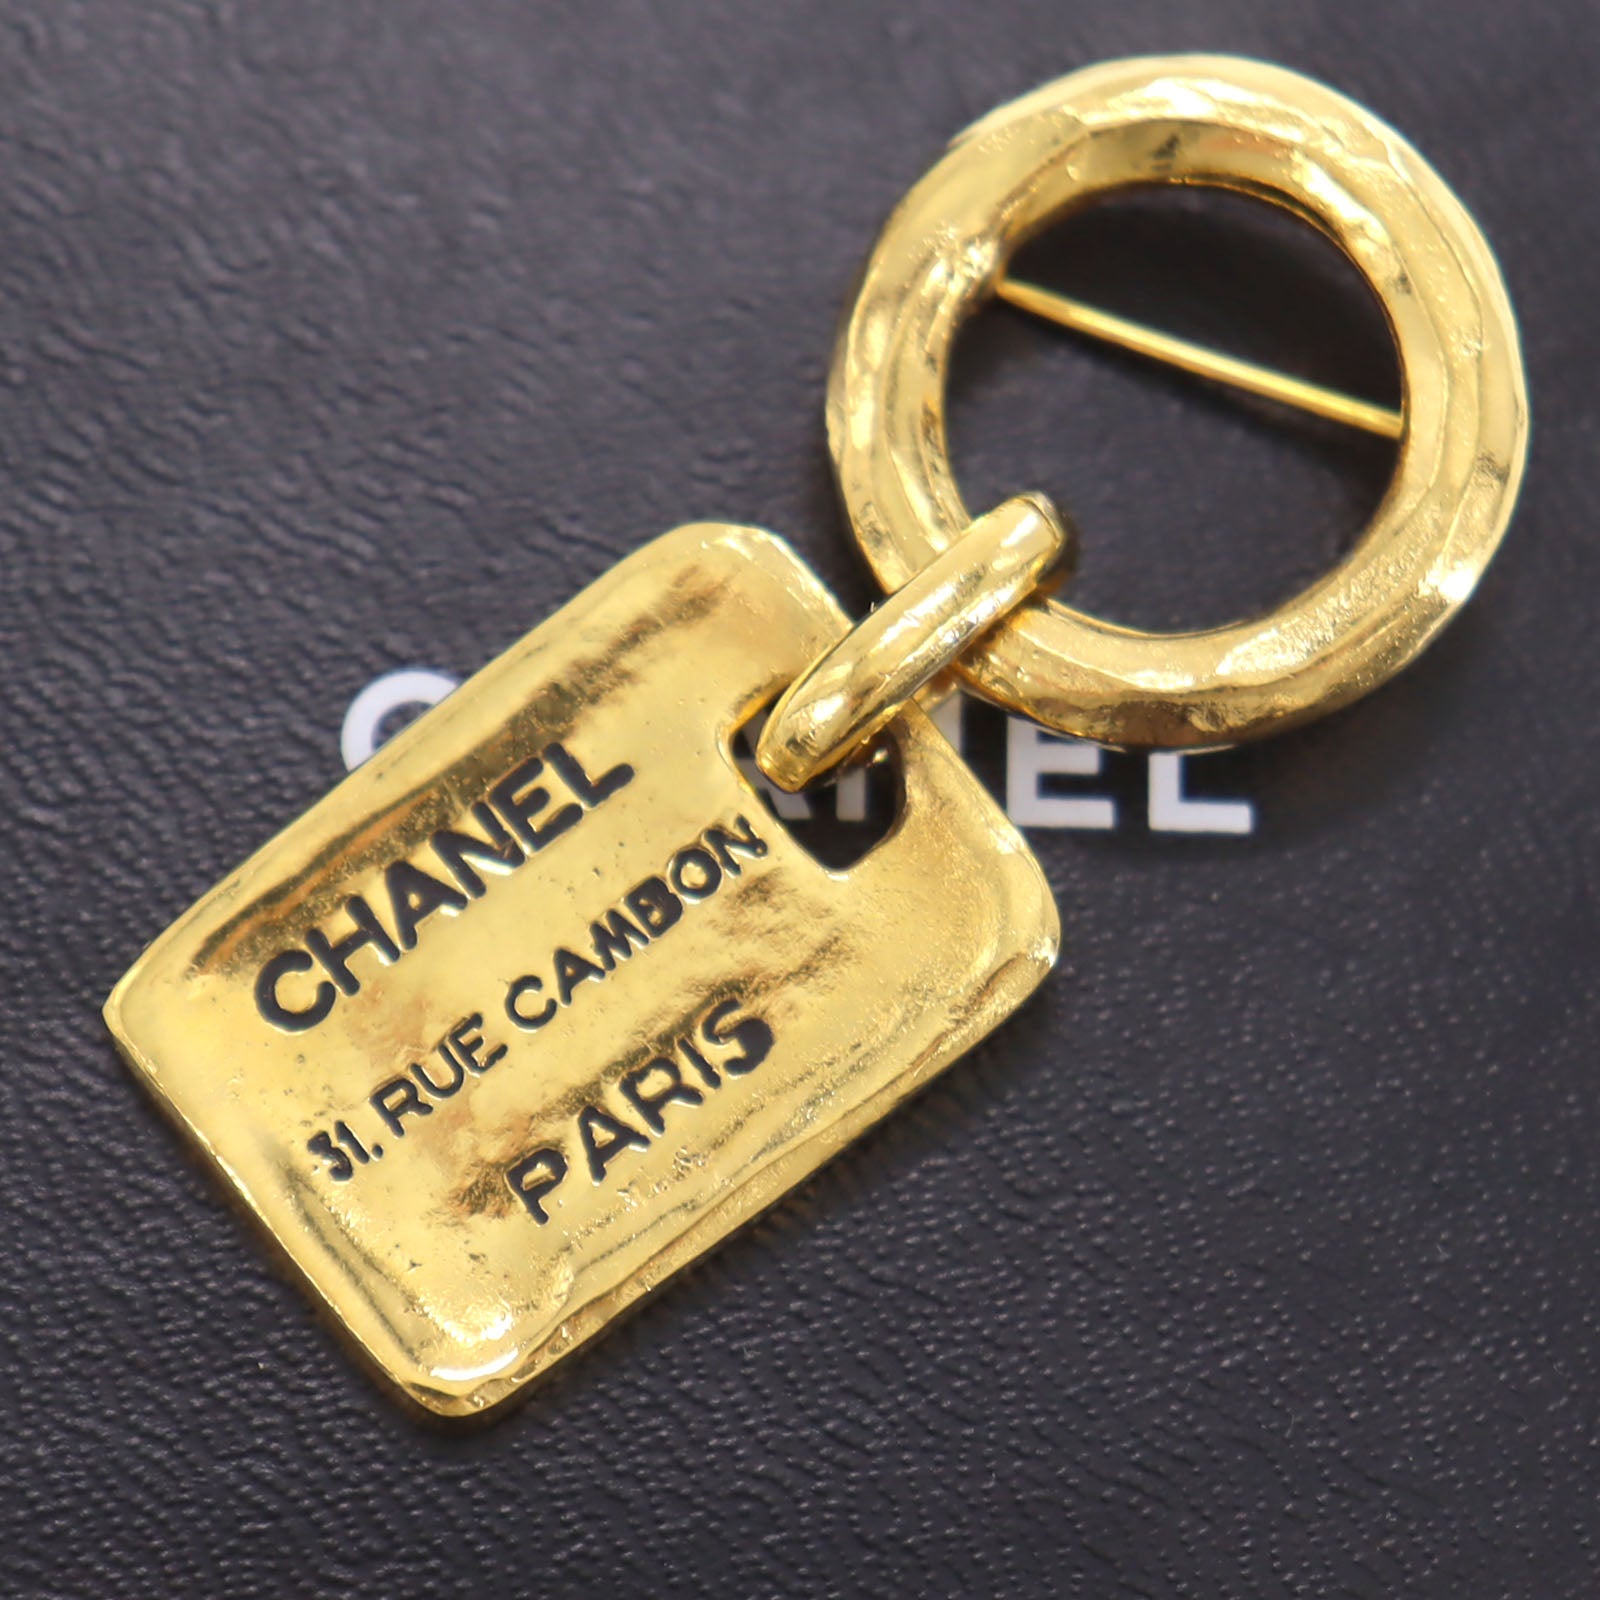 CHANEL 31. RUE CAMBON PARIS Plate Pin Brooch Gold Plated 1188 #CG961 ...